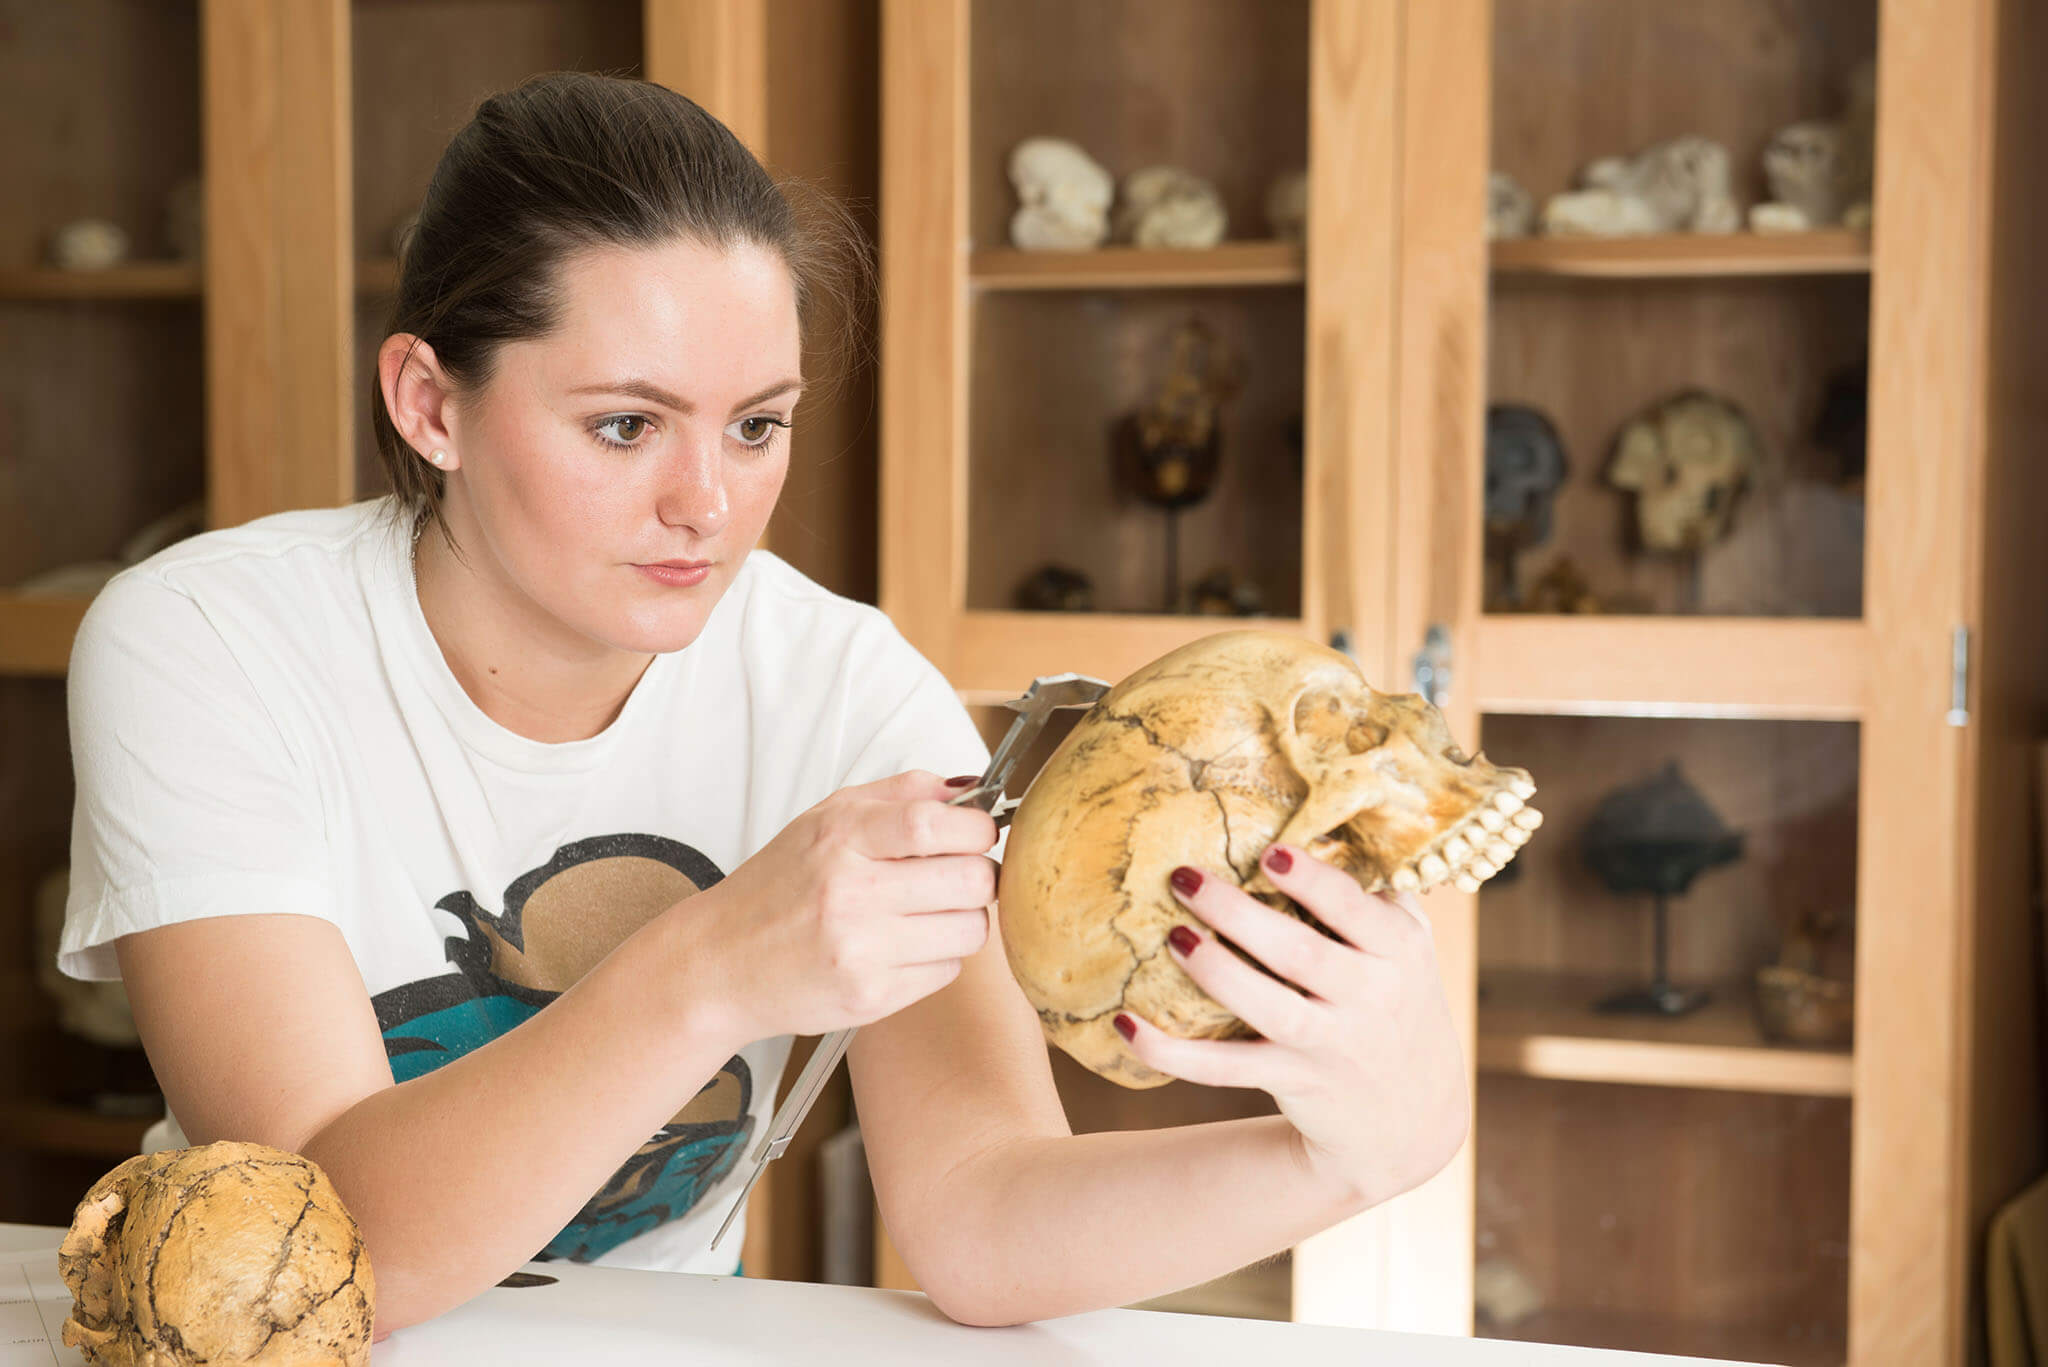 A student holding a human skull